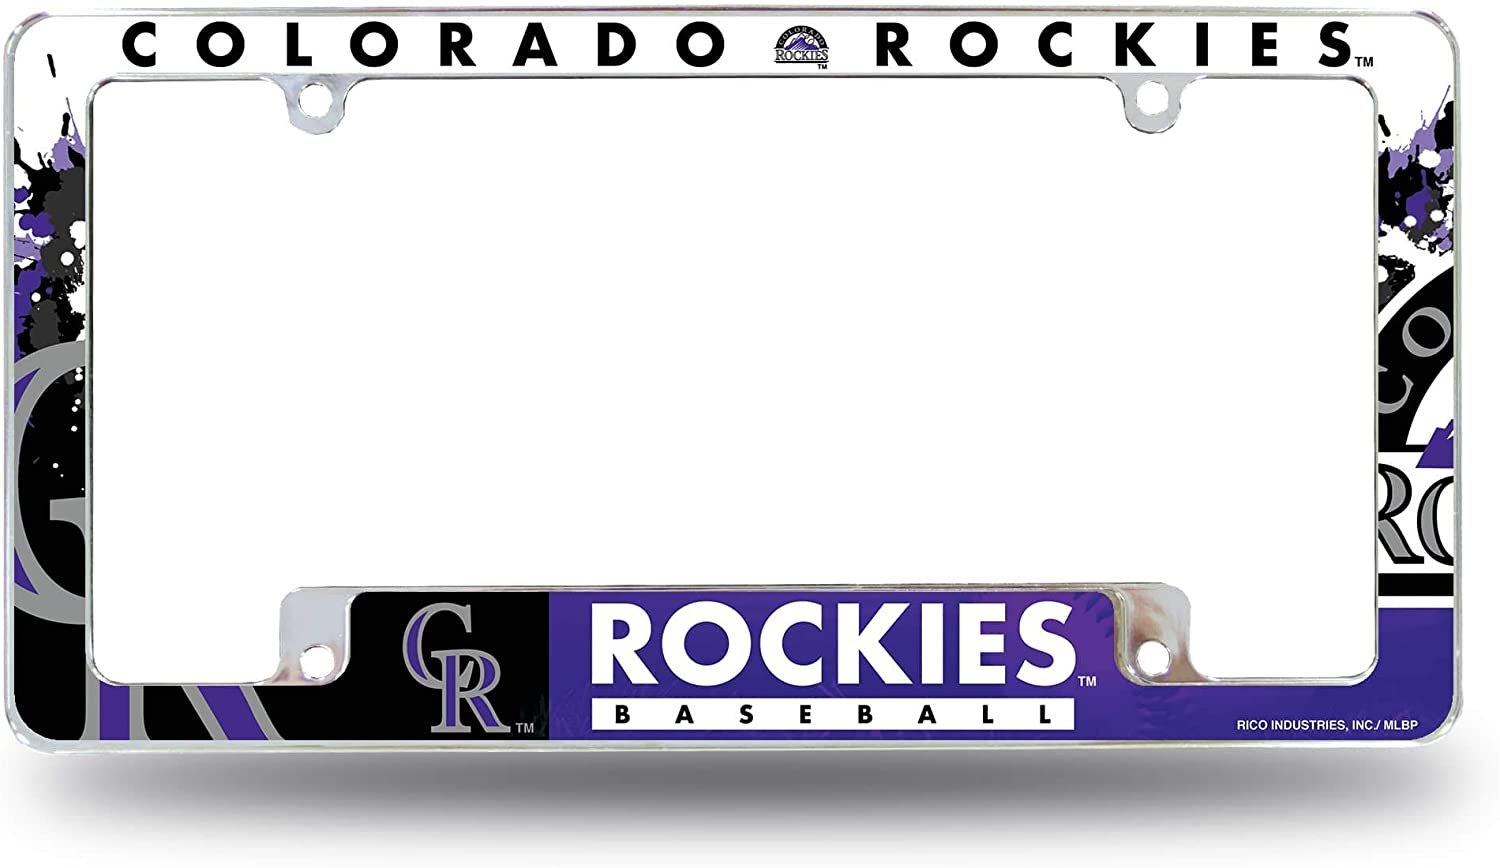 Colorado Rockies Metal License Plate Frame Tag Cover All Over Design Heavy Gauge